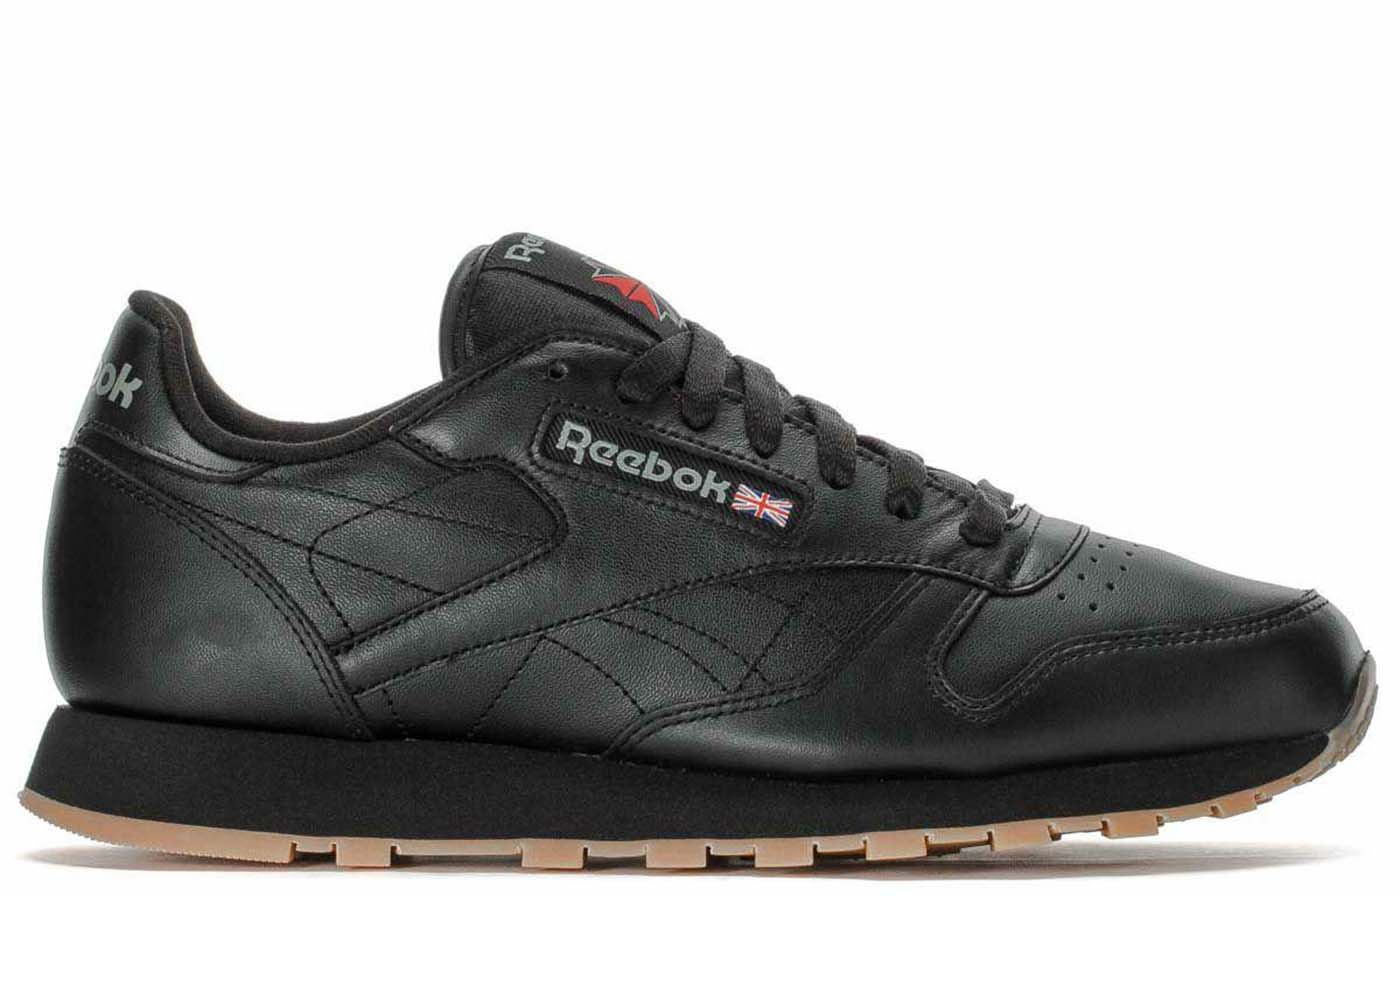 Reebok Classic Black Gum Leather Men Sneakers New In Box 100% Authentic 49798 